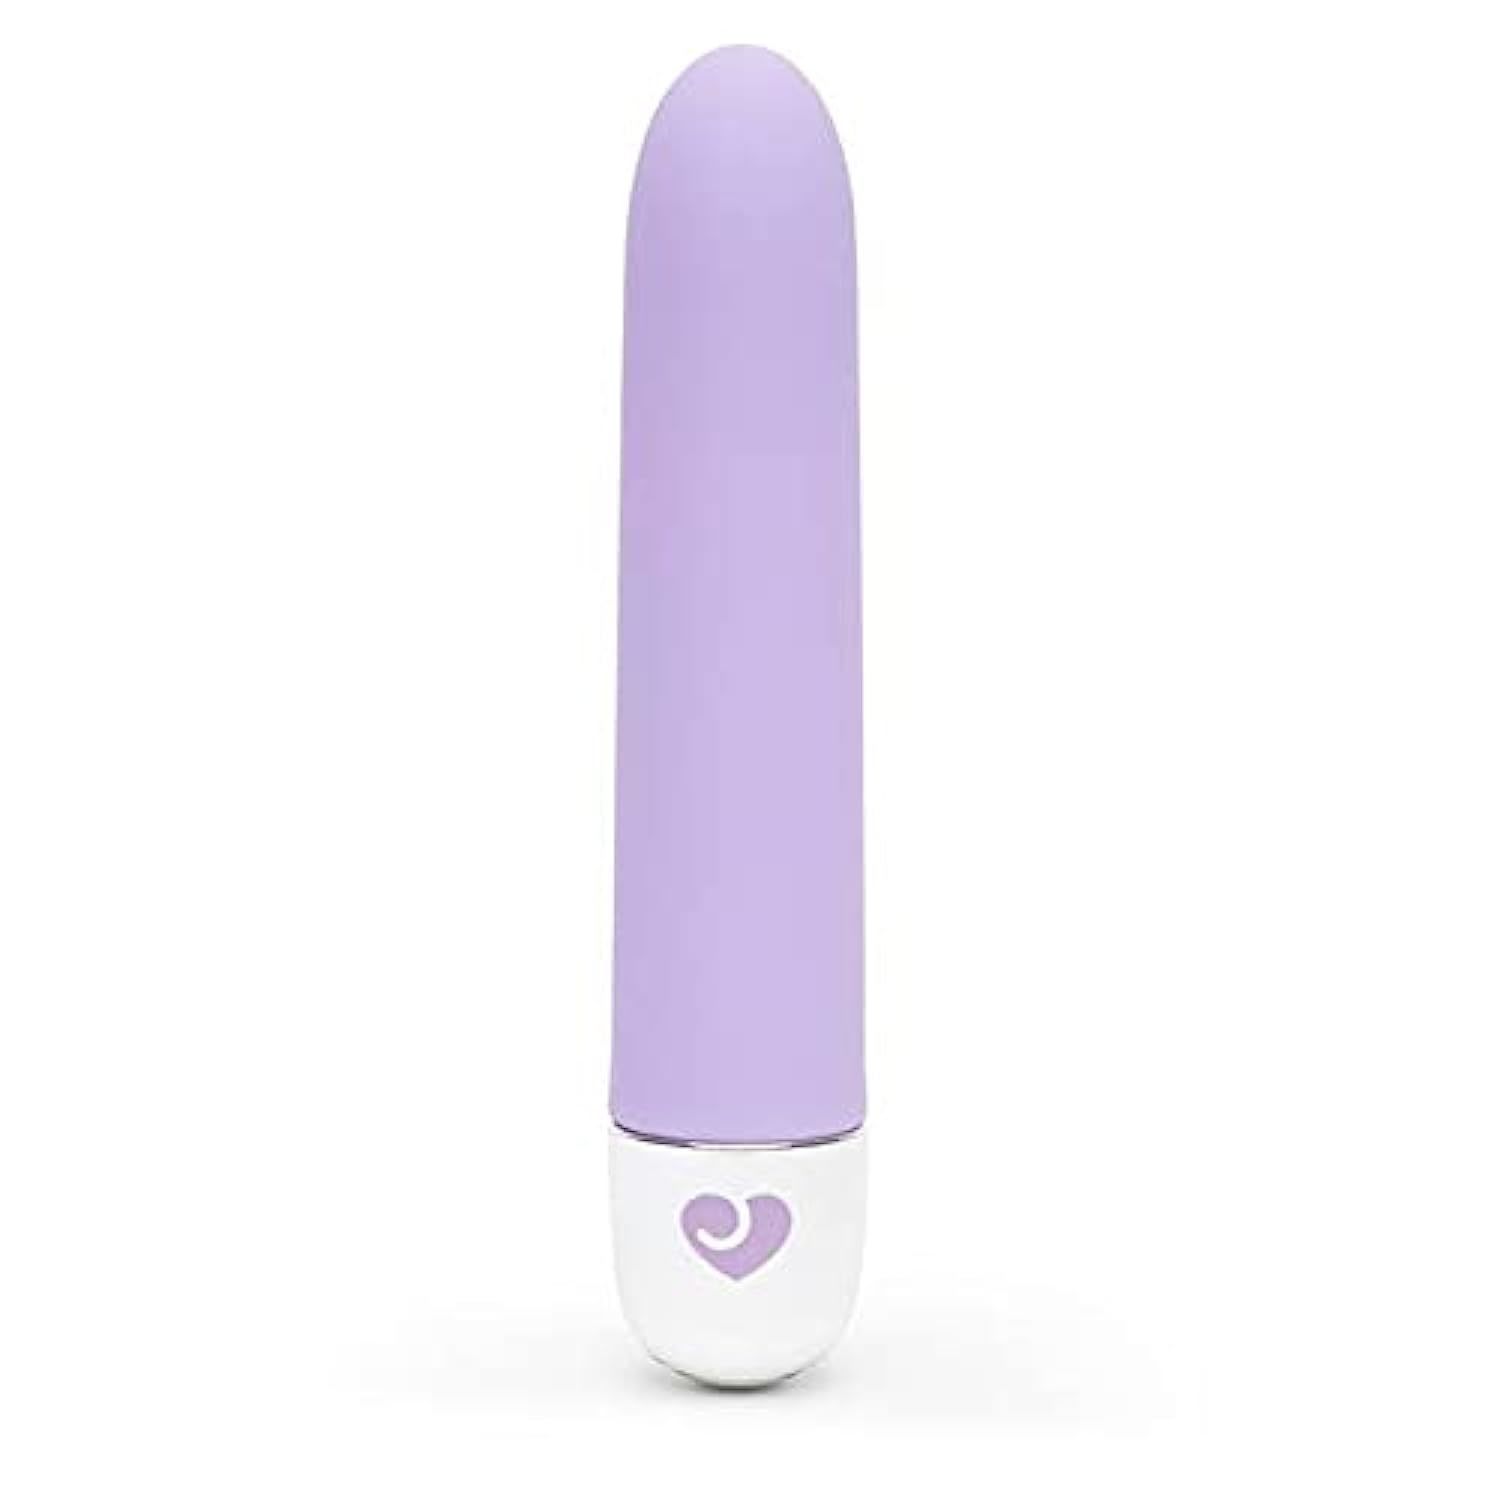 Primary image for Purple Glow 10 Function Mini Classic Vibrator - Silicone - Beginners Friendly